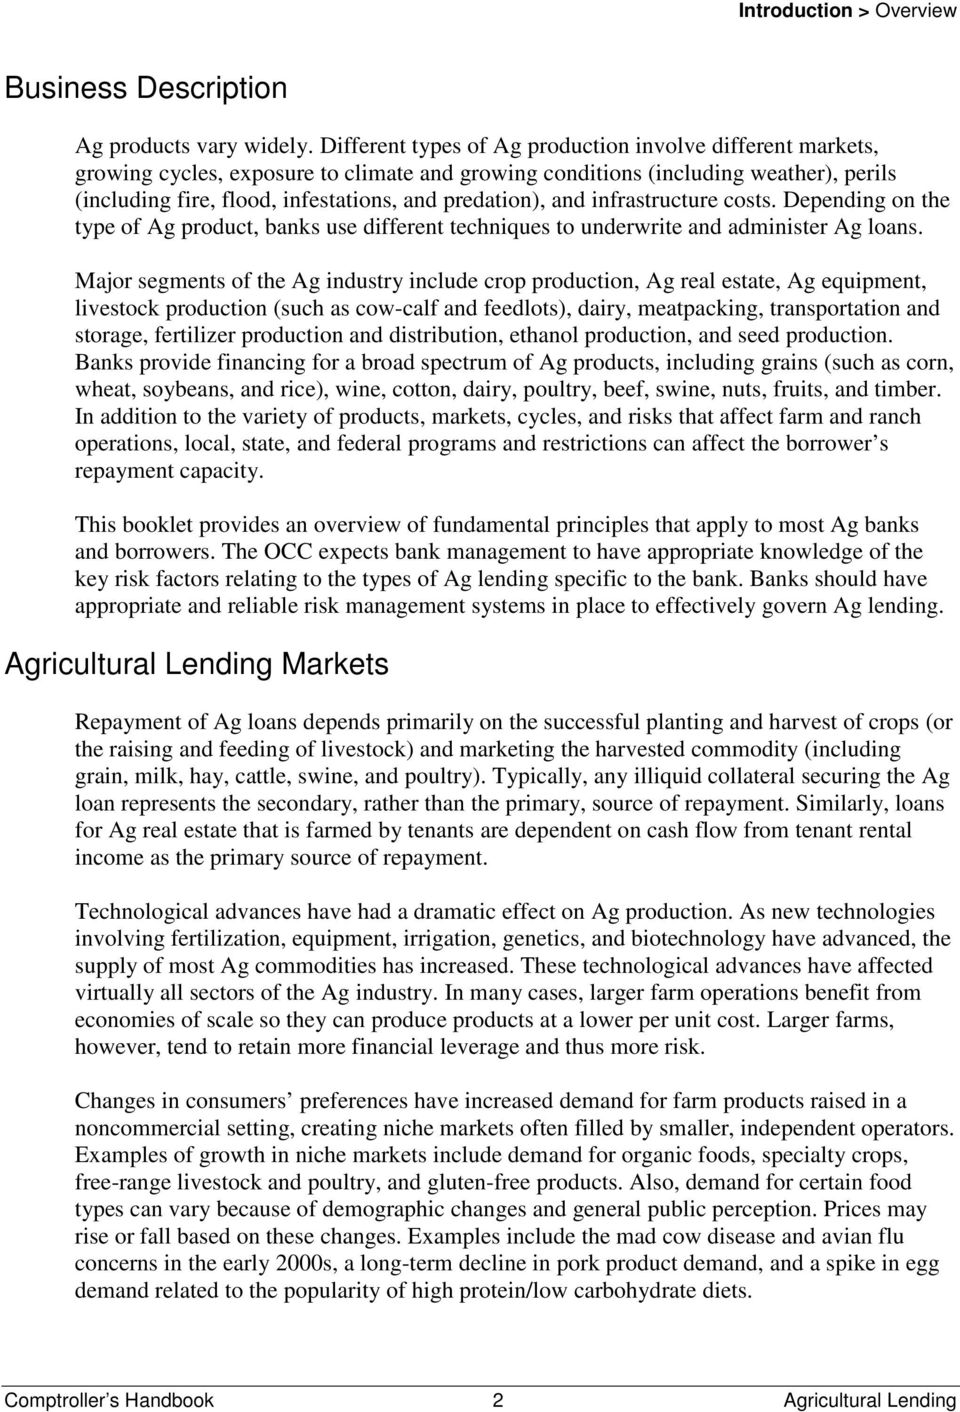 predation), and infrastructure costs. Depending on the type of Ag product, banks use different techniques to underwrite and administer Ag loans.